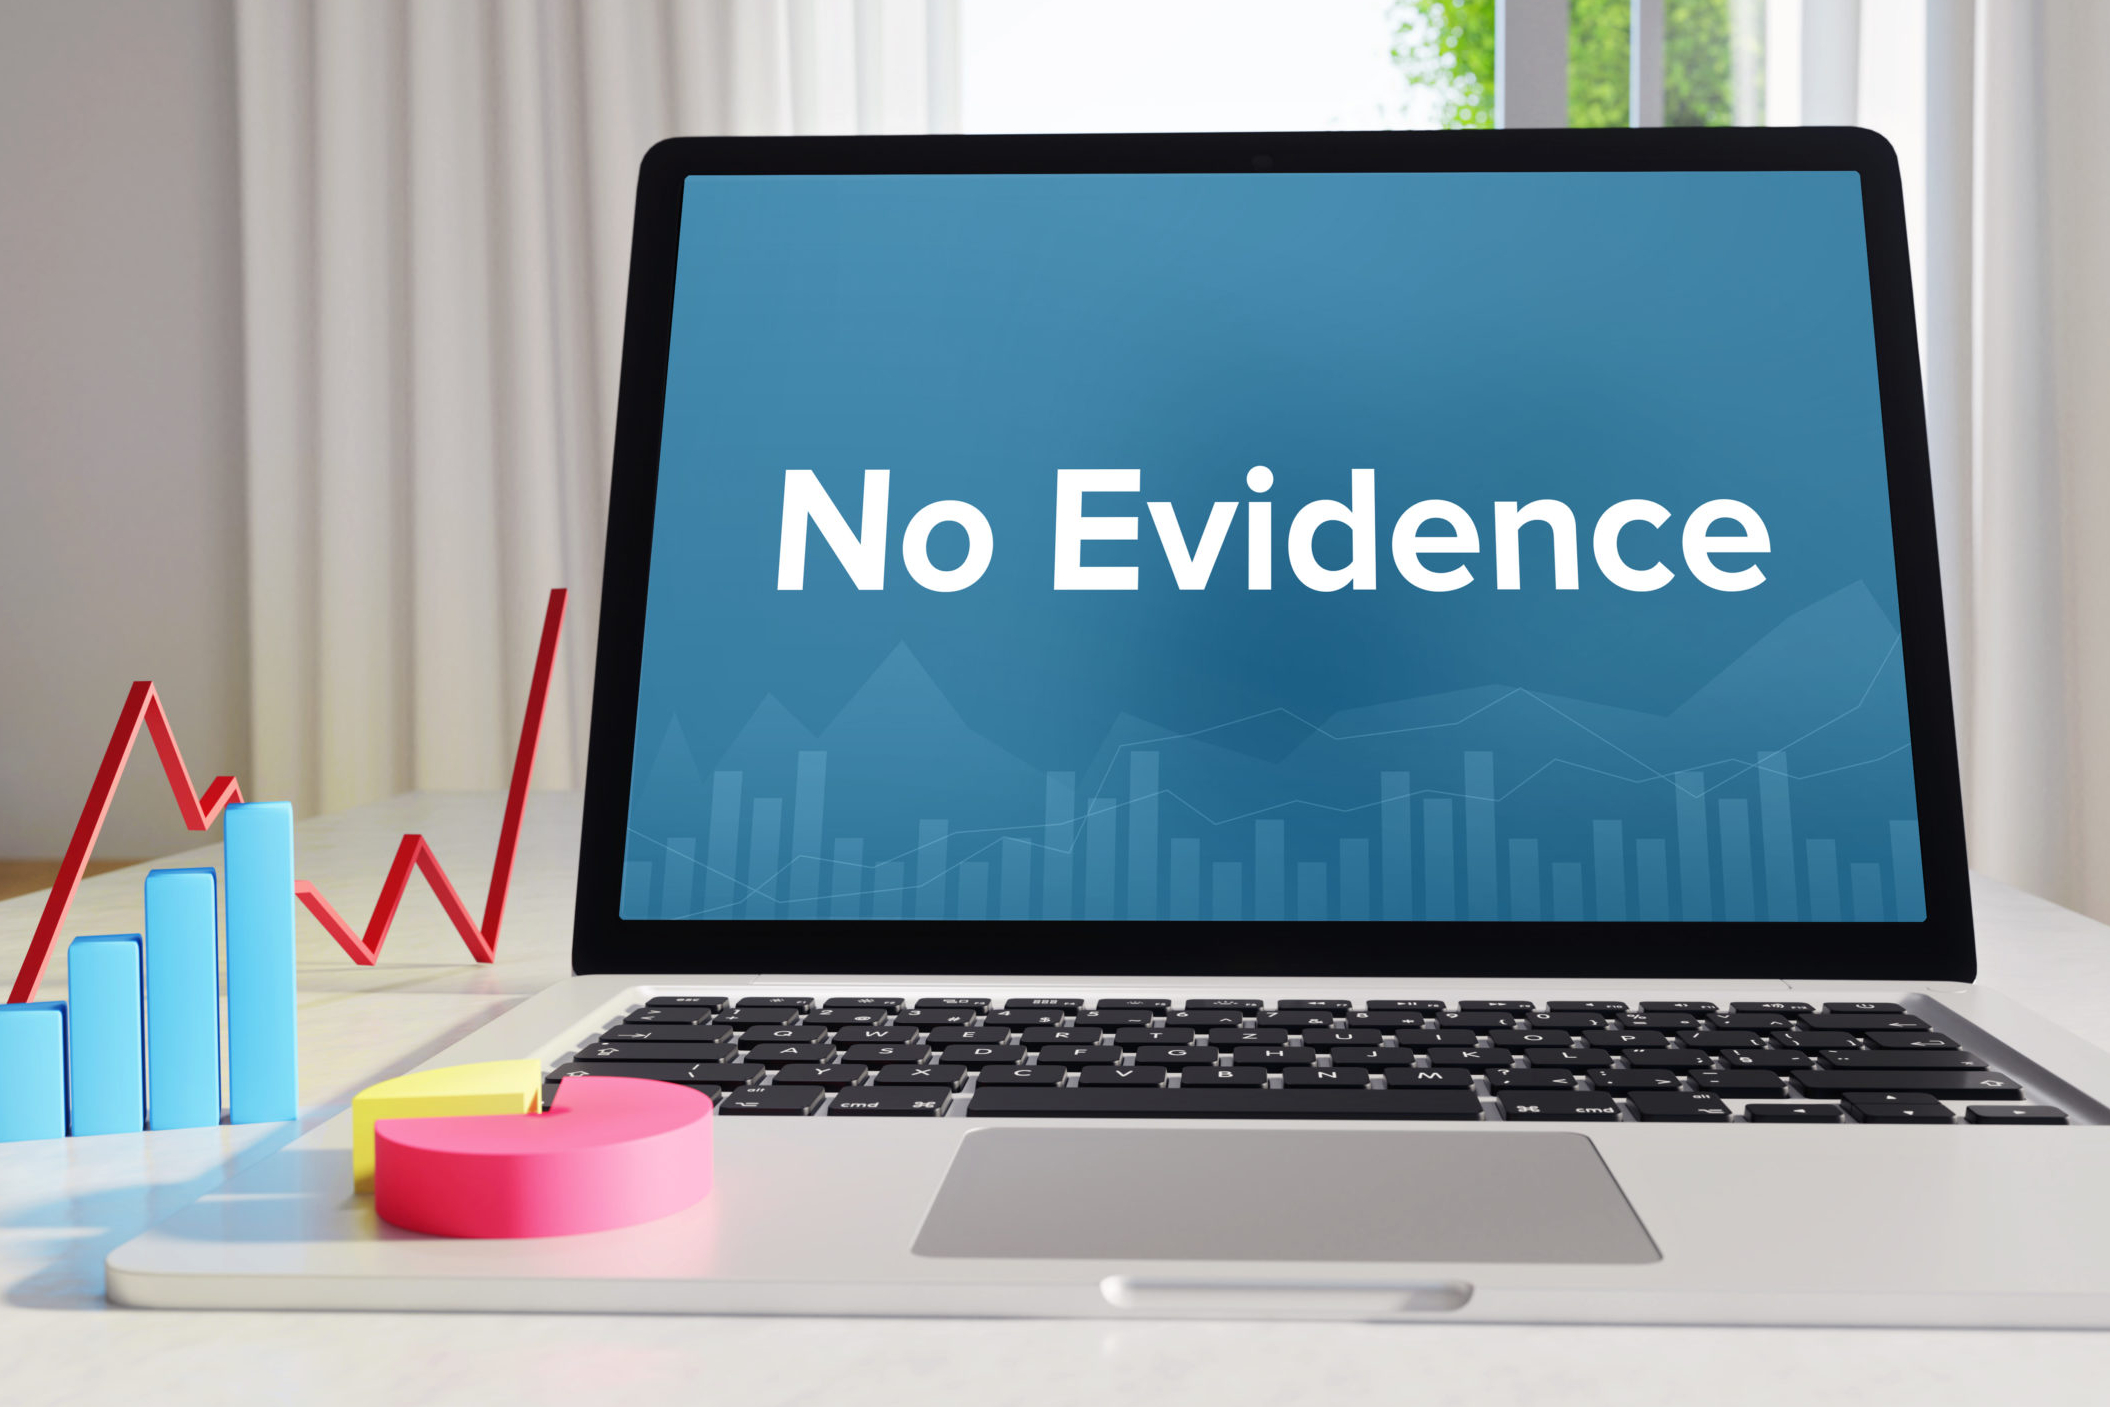 "No evidence" on computer screen